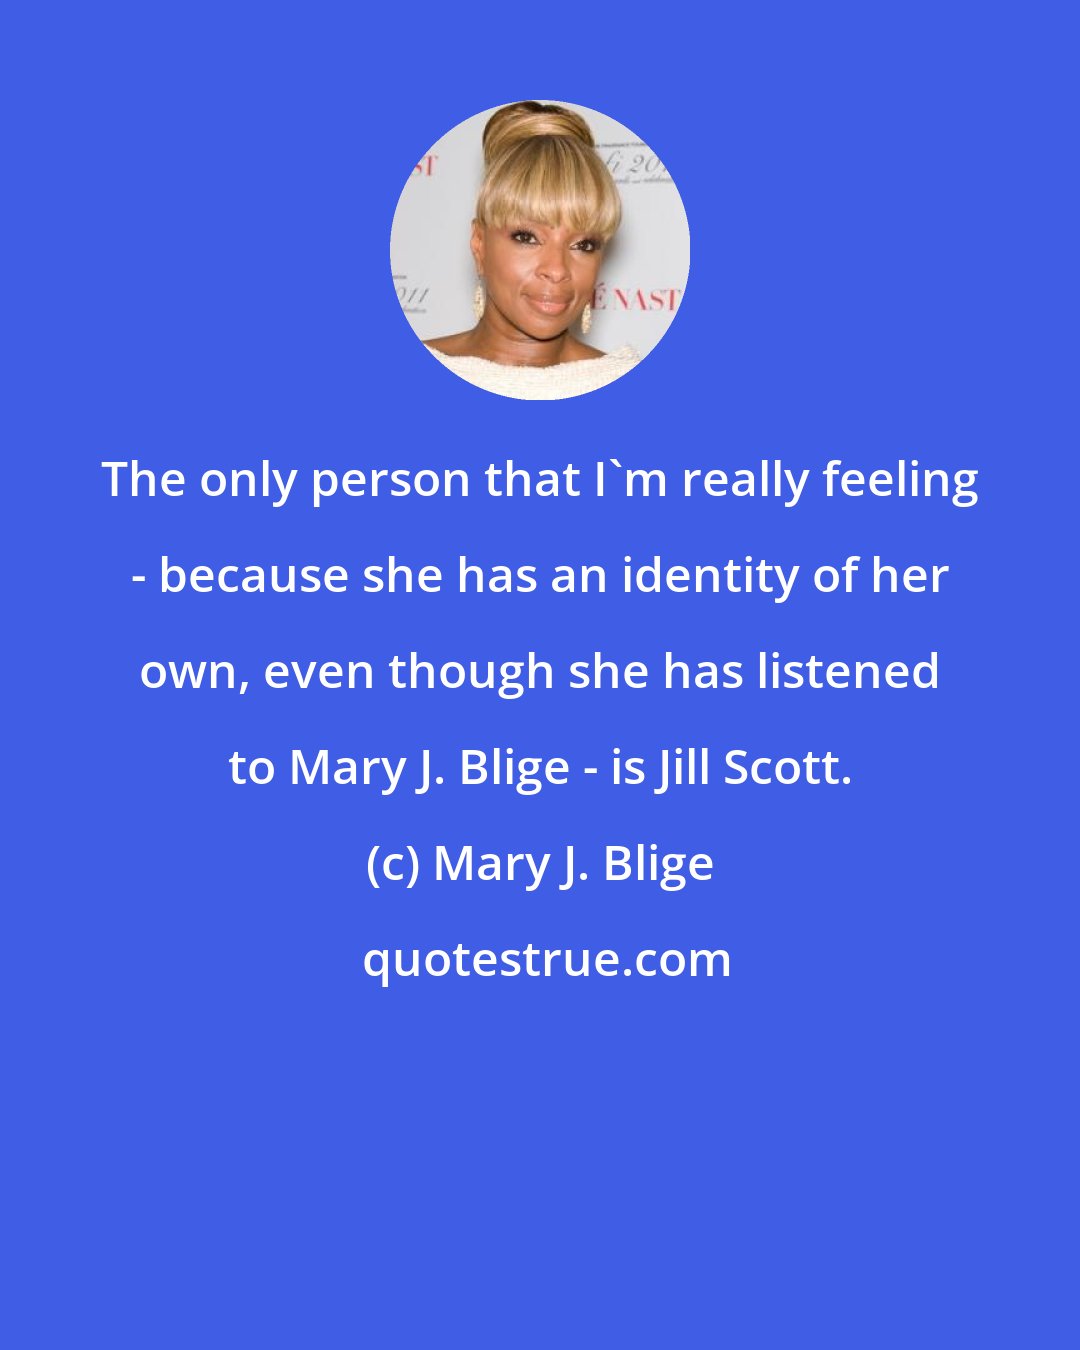 Mary J. Blige: The only person that I'm really feeling - because she has an identity of her own, even though she has listened to Mary J. Blige - is Jill Scott.